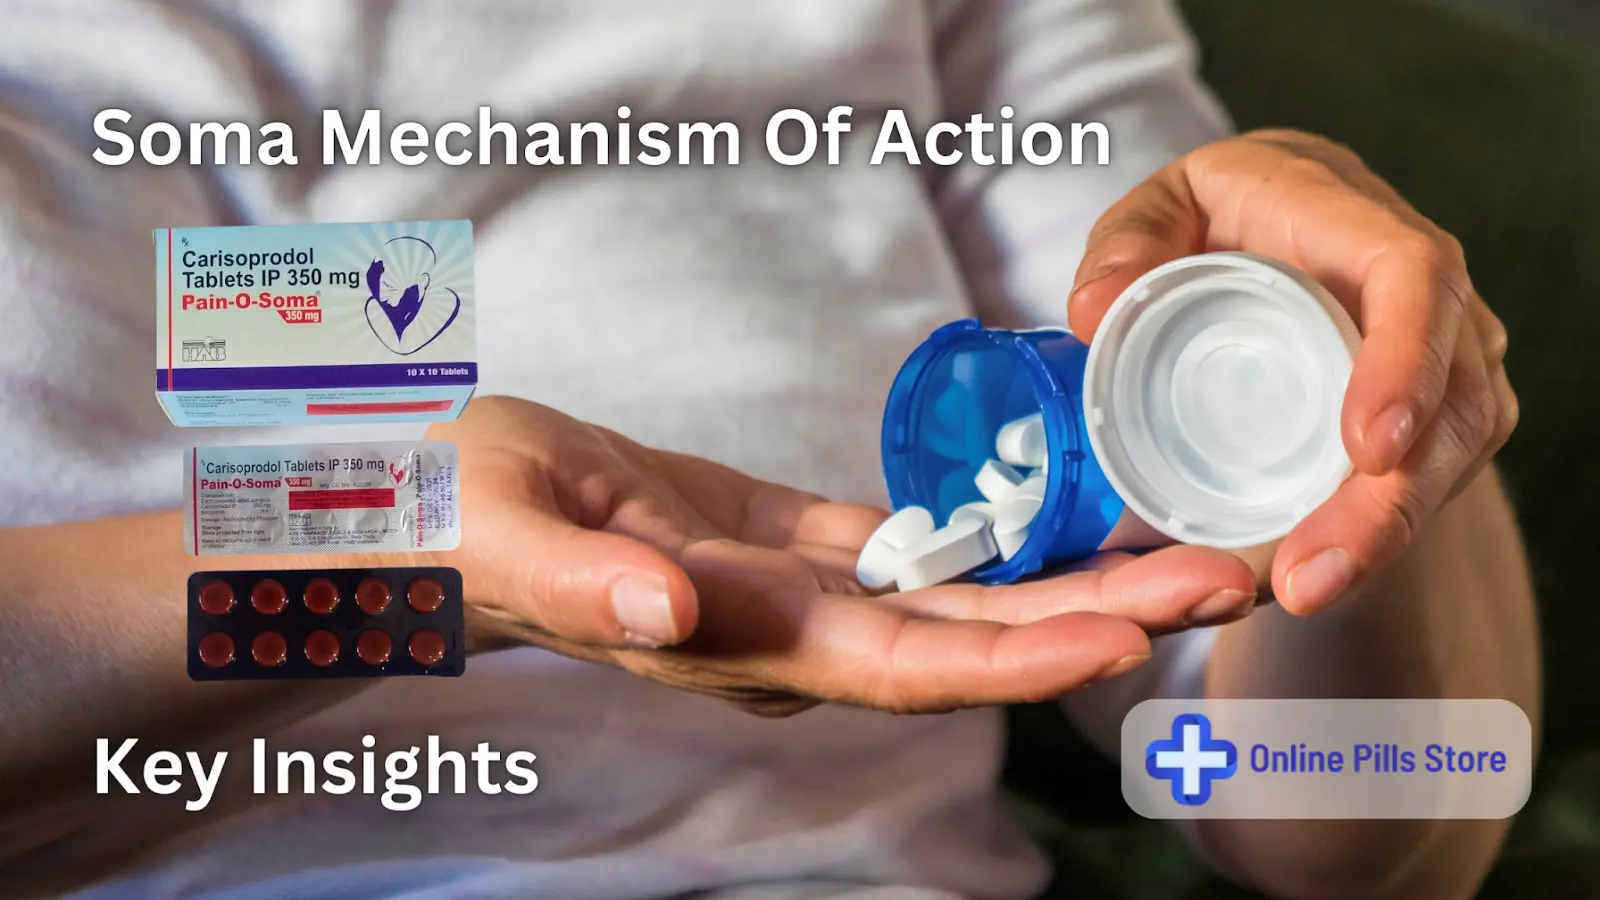 Soma Mechanism Of Action- Key Insights